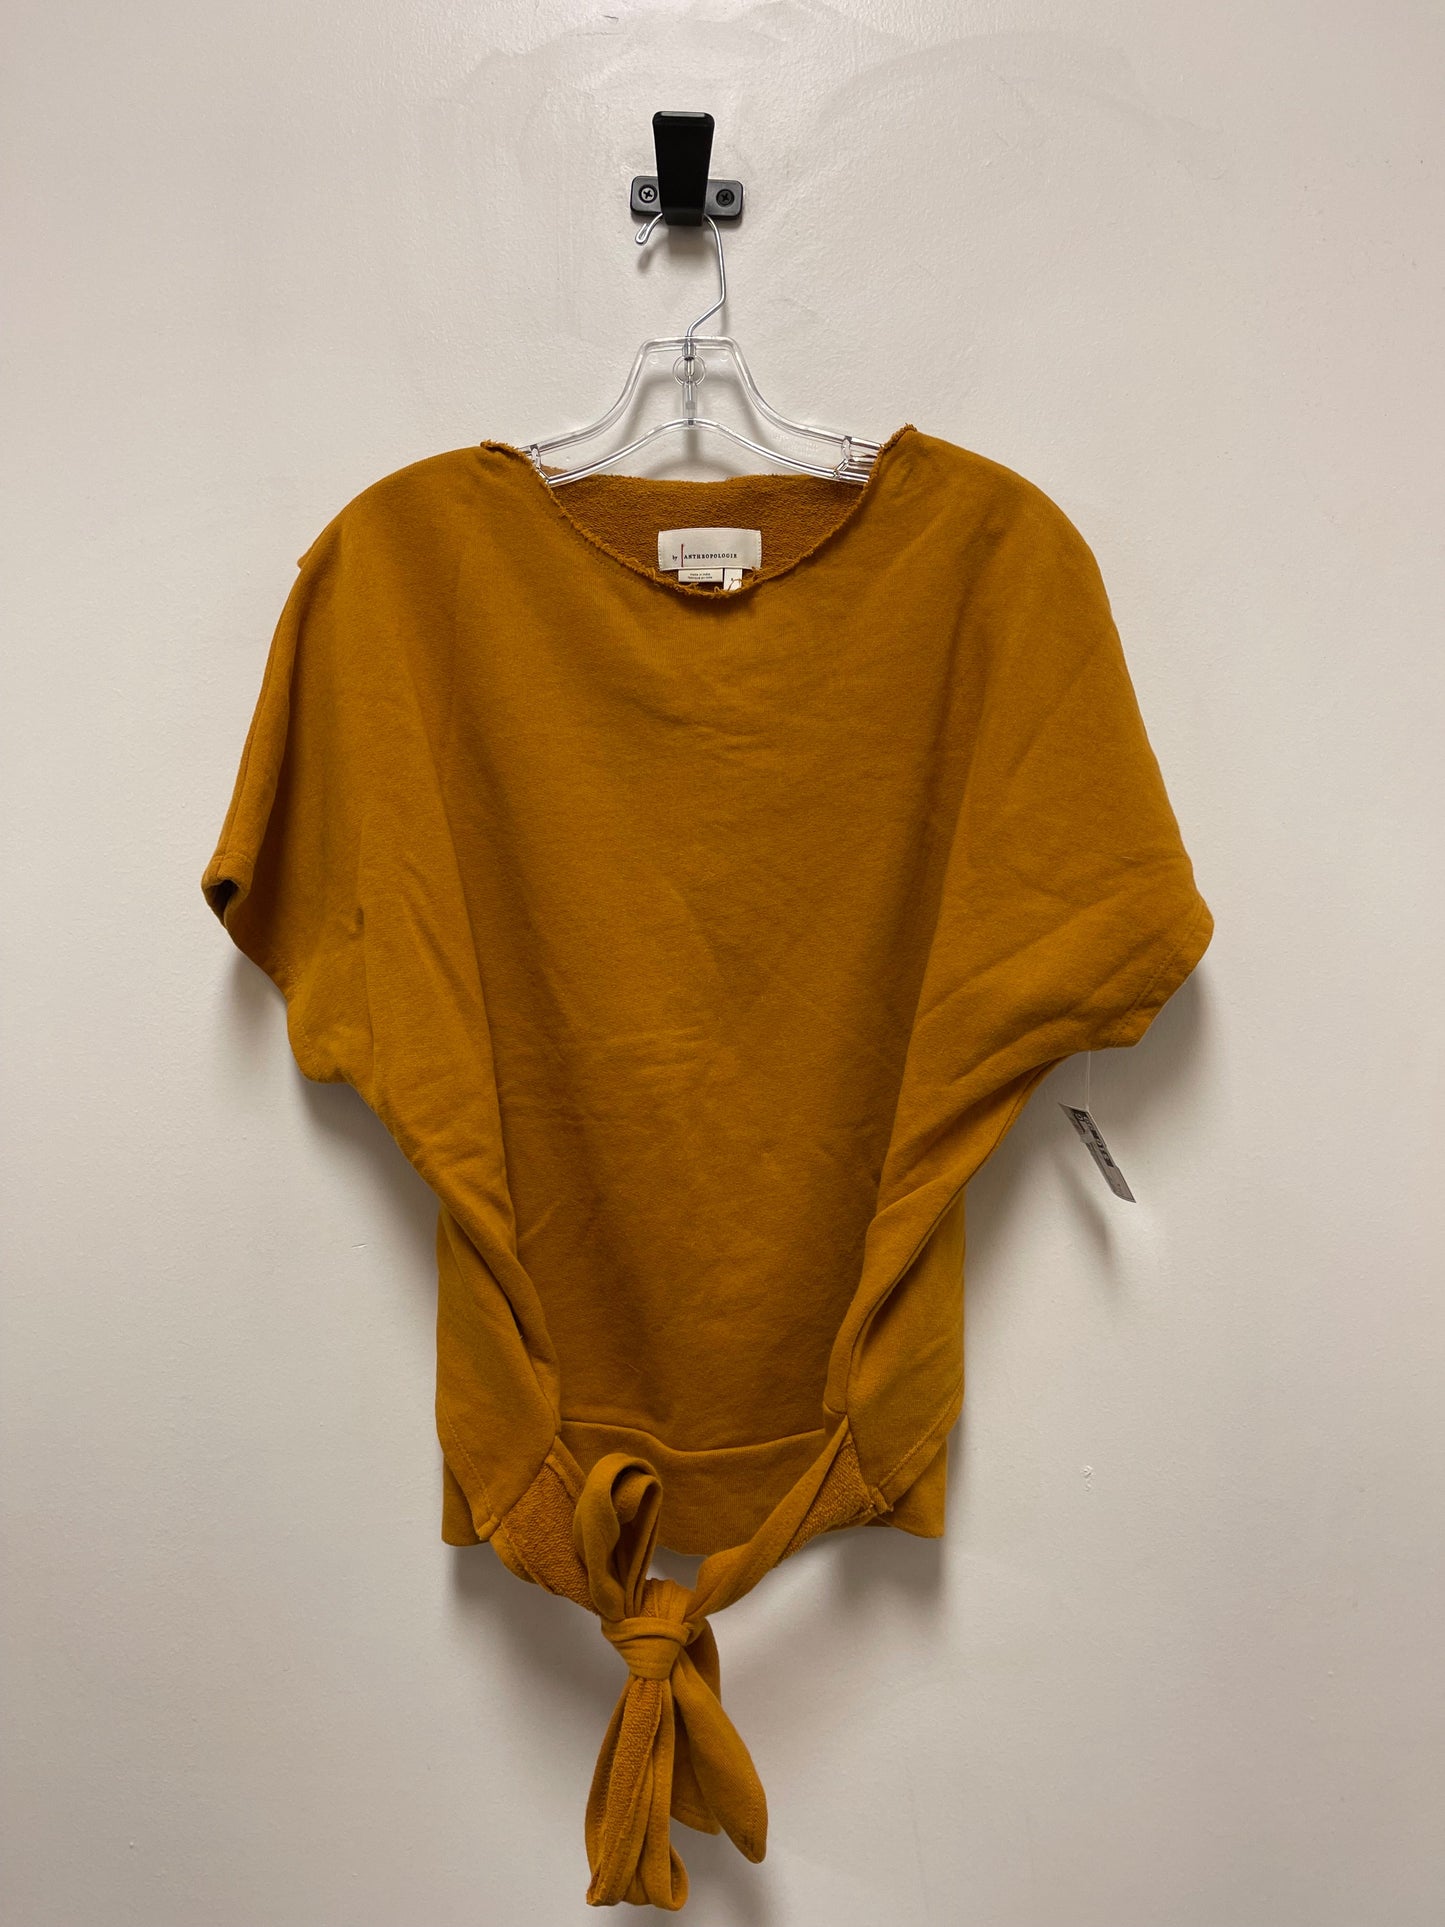 Yellow Top Short Sleeve Anthropologie, Size S